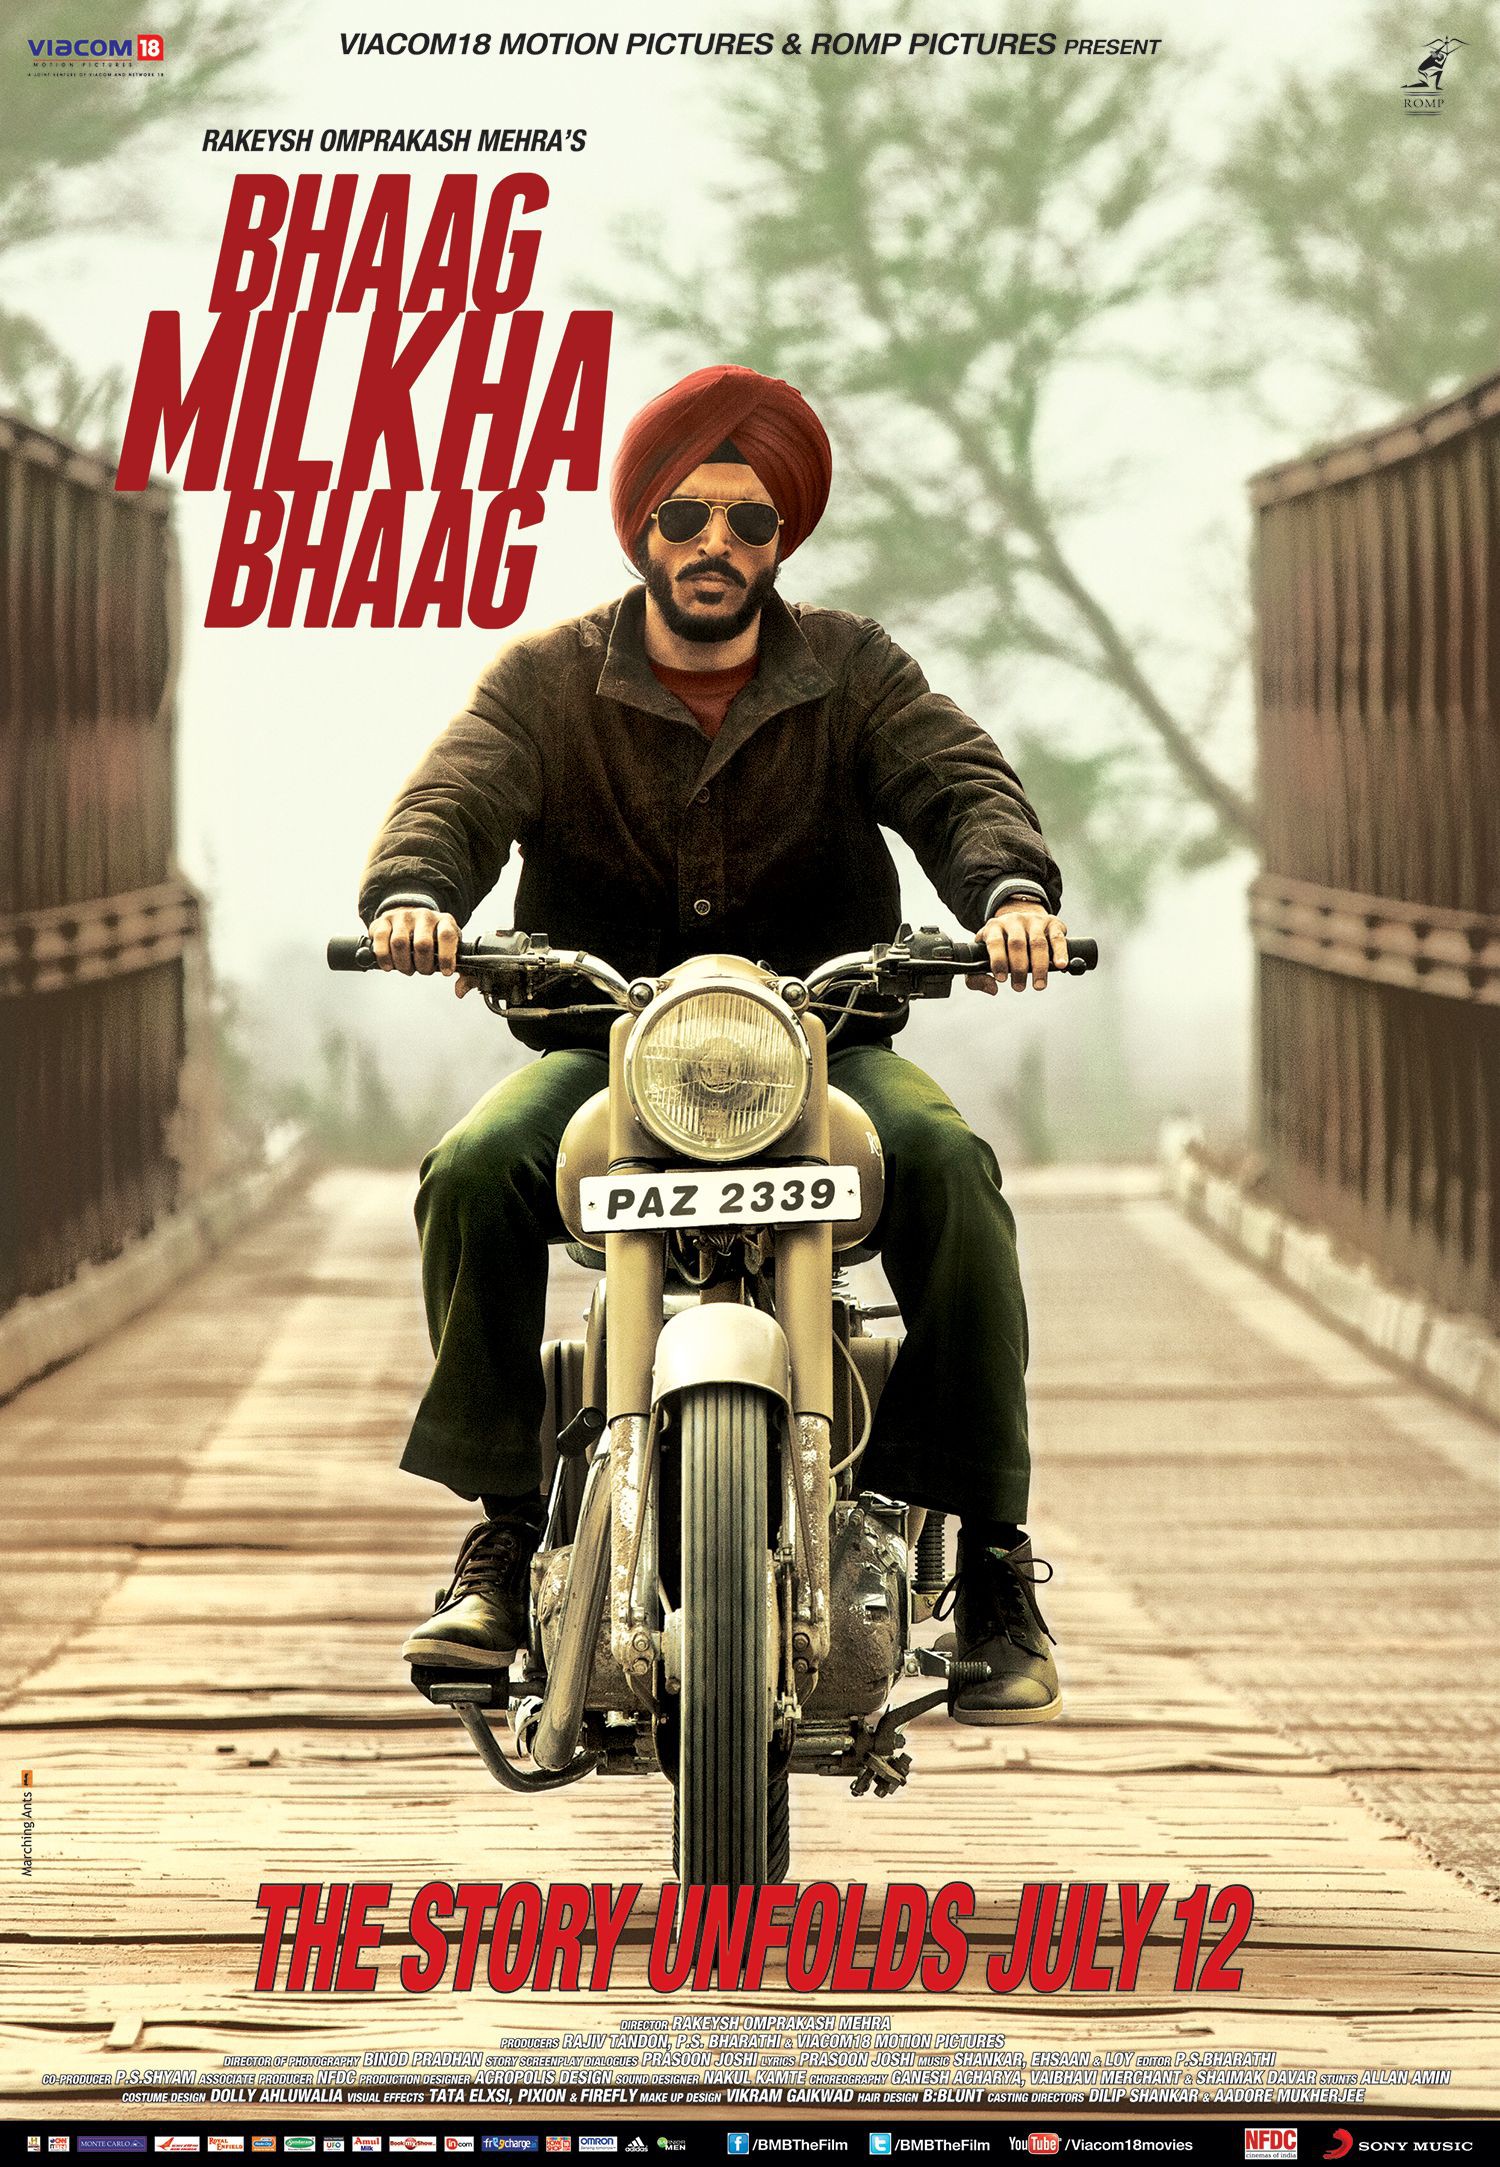 Mega Sized Movie Poster Image for Bhaag Milkha Bhaag (#4 of 7)